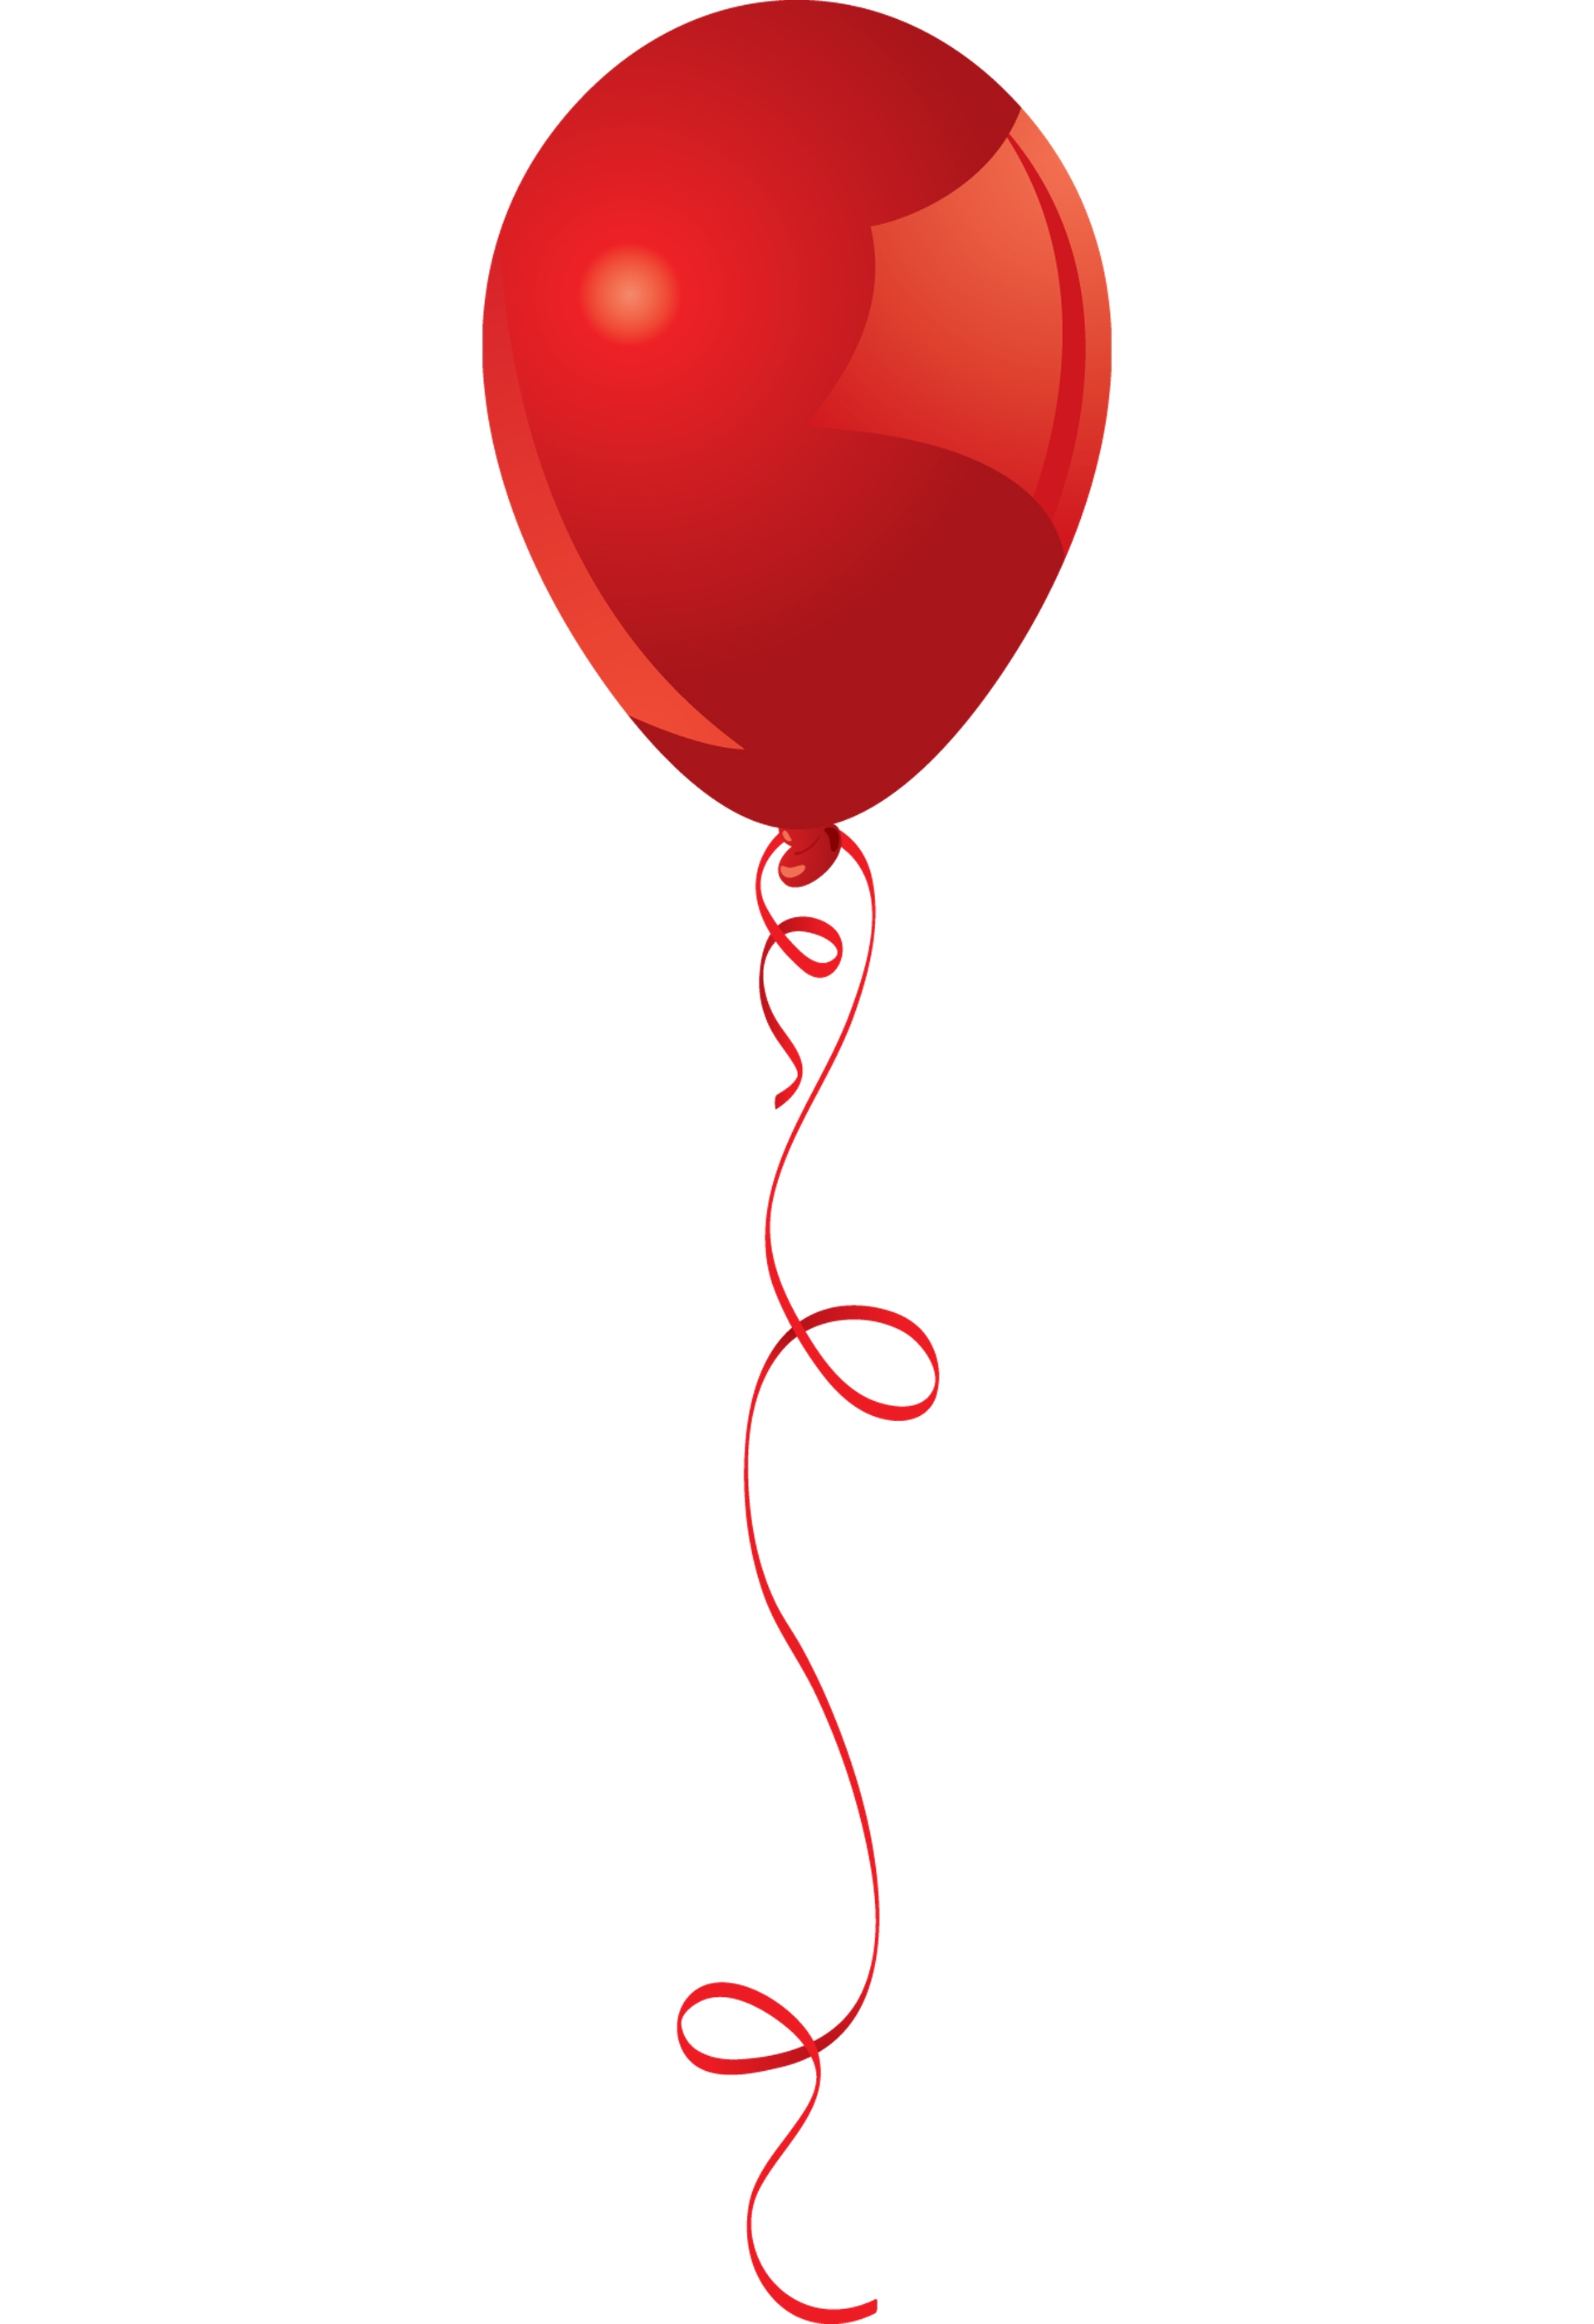 1000+ images about i love balloons